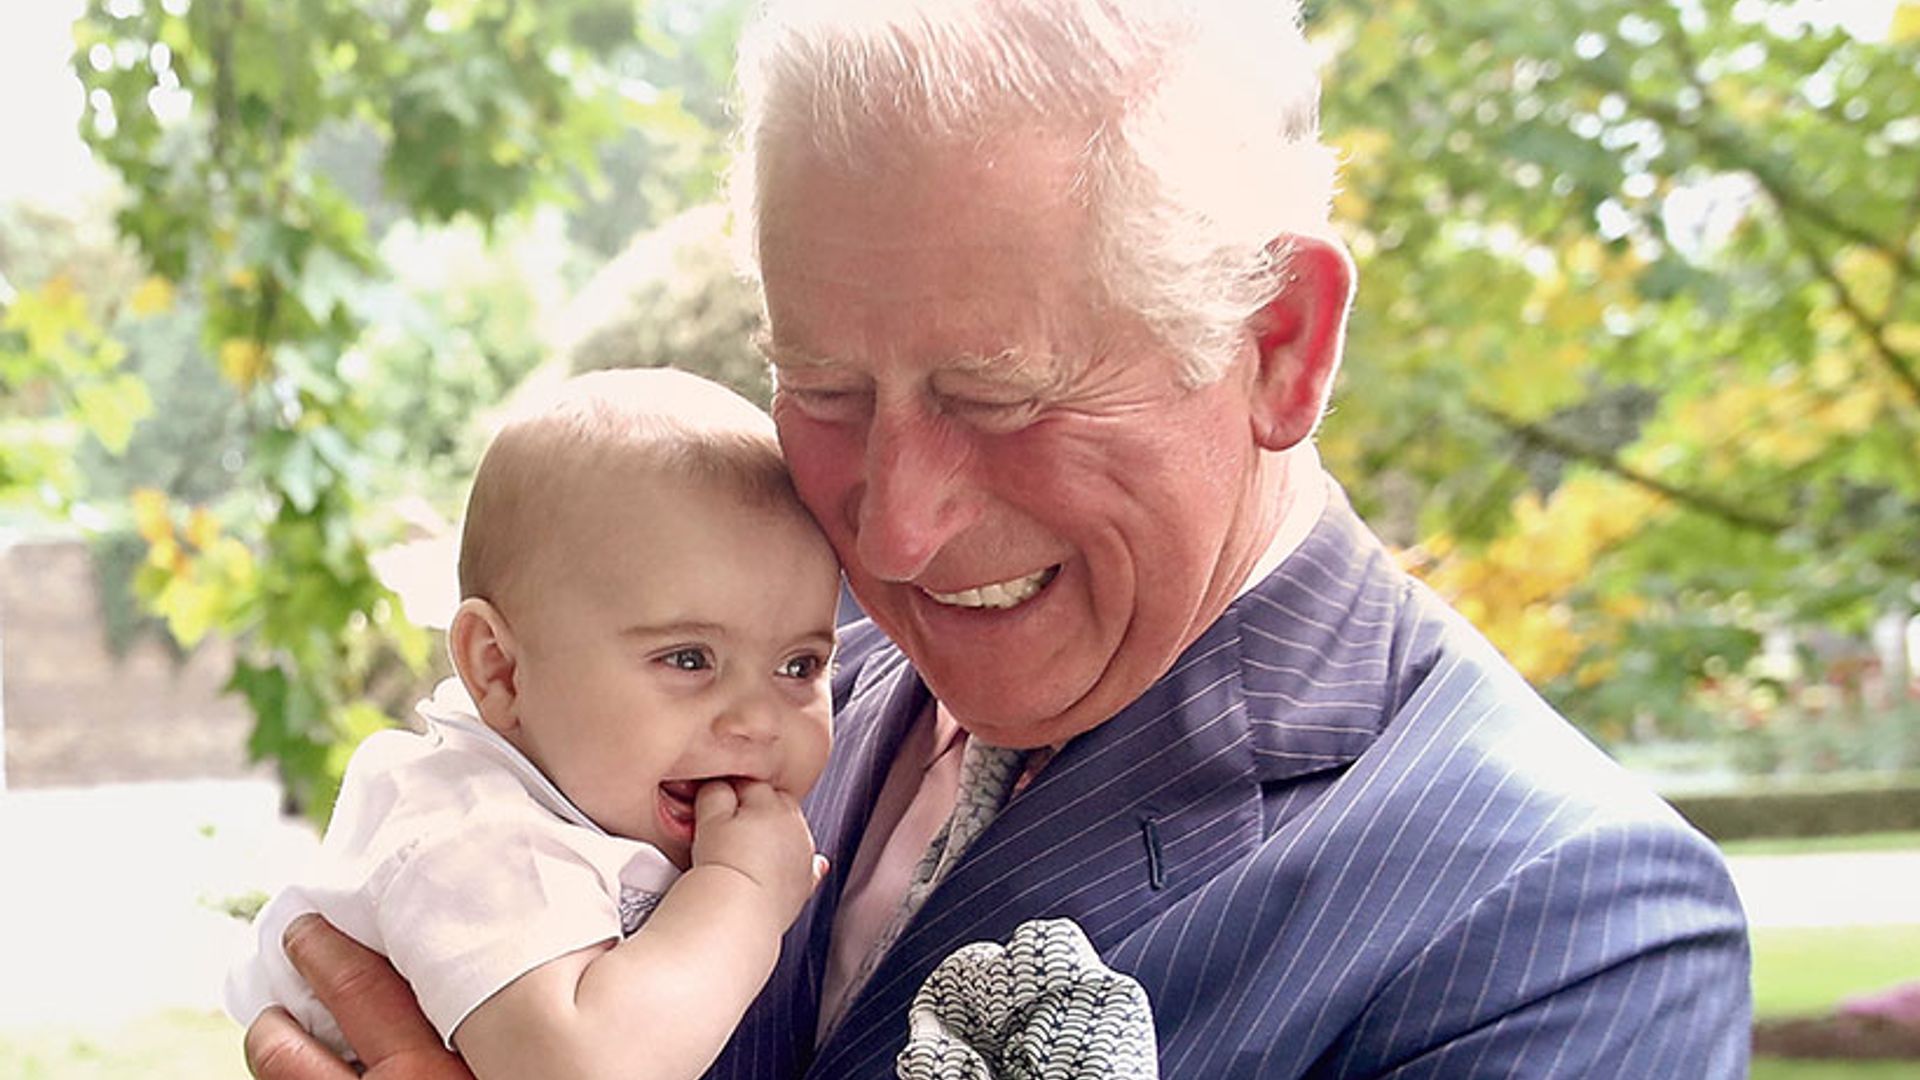 Adorable Prince Louis plays with grandfather Prince Charles in new photos – see album